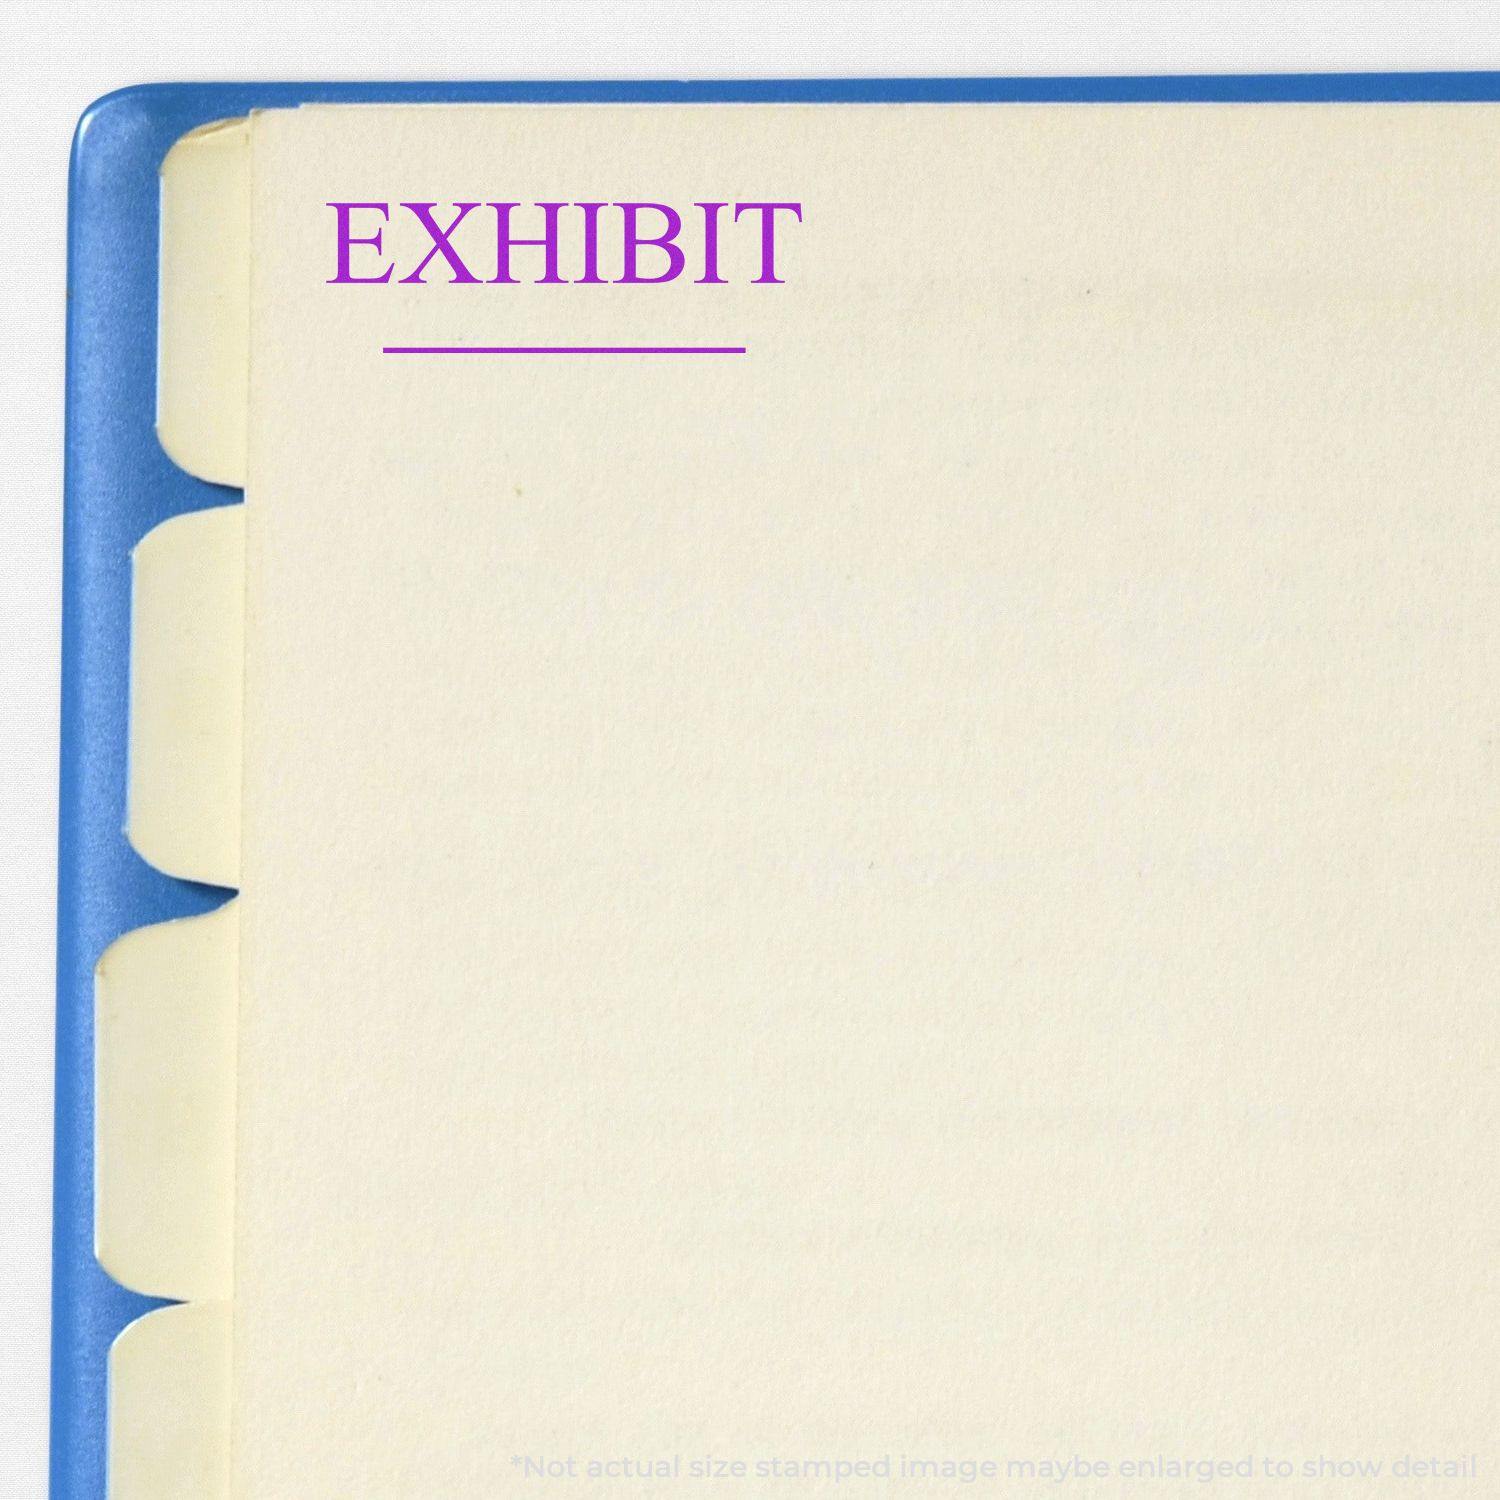 A self-inking stamp with a stamped image showing how the text "EXHIBIT" with a line under it is displayed after stamping.